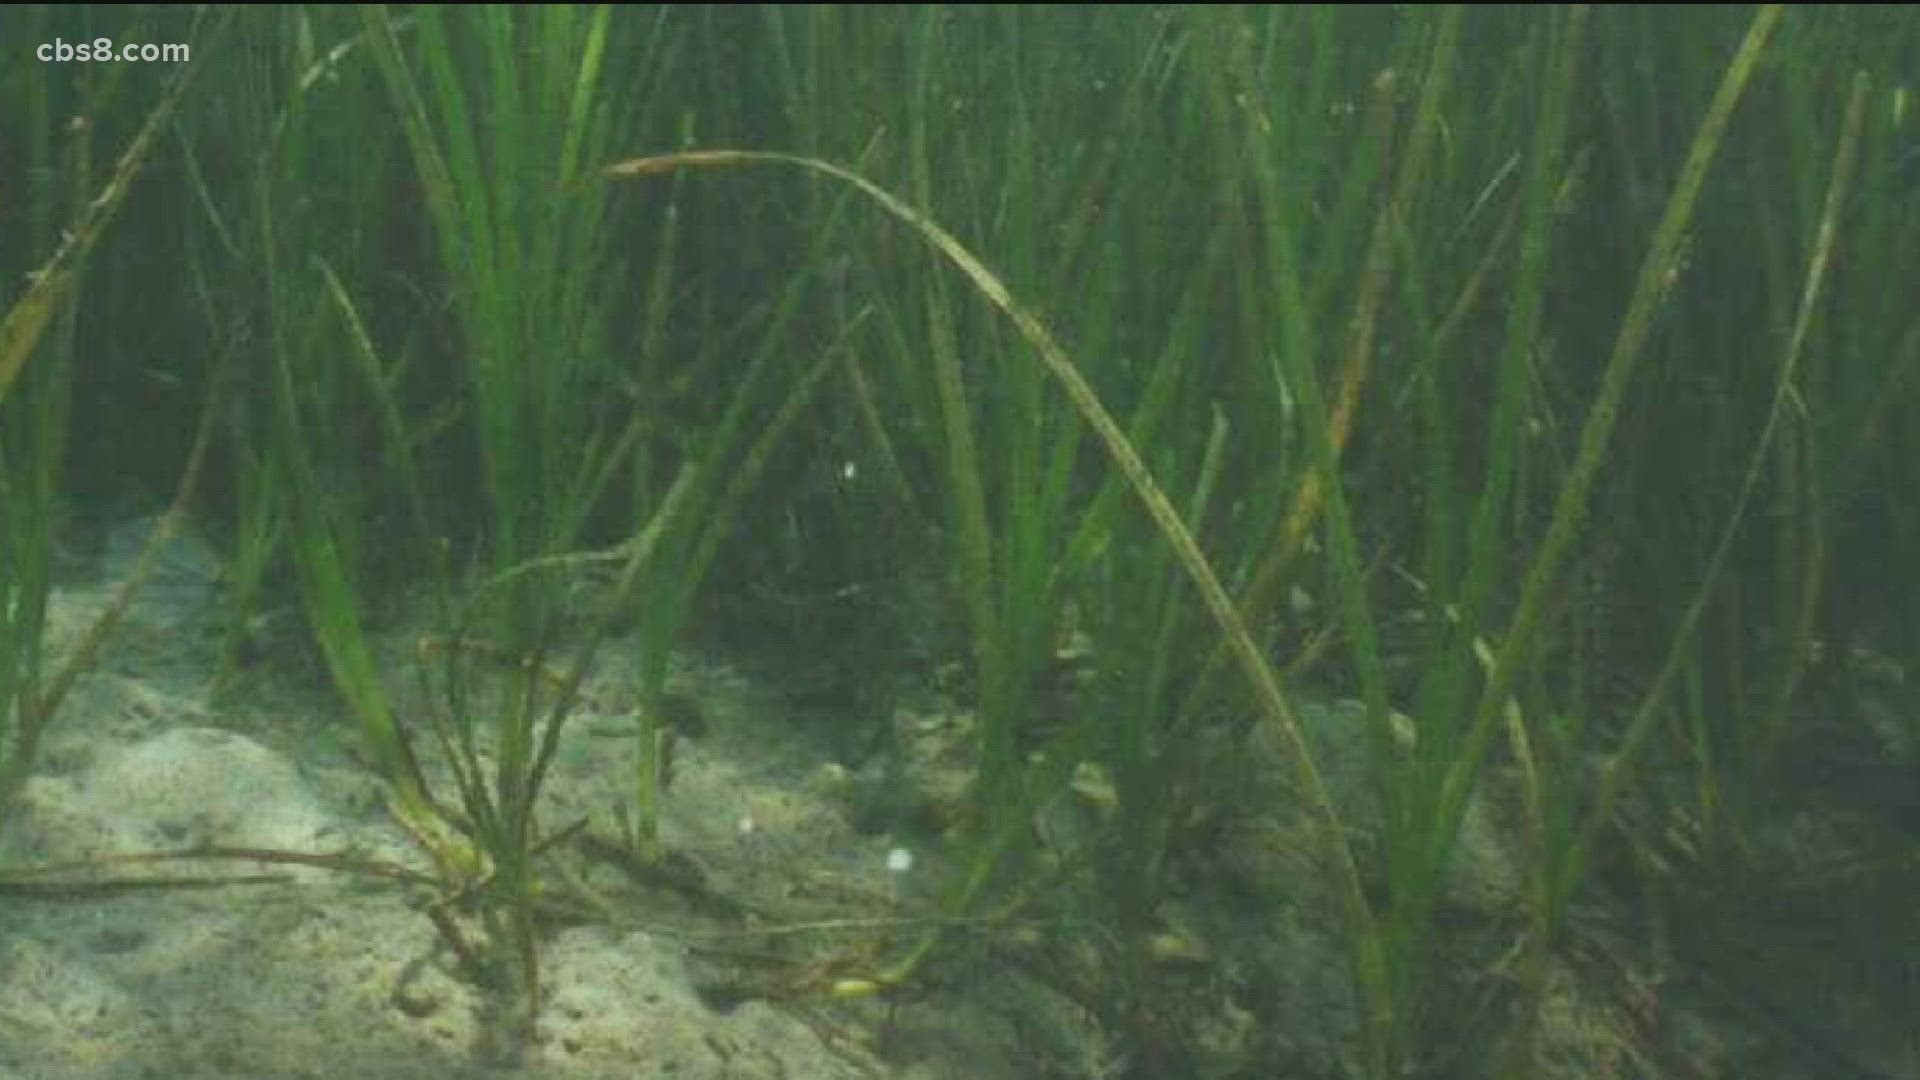 According to research, eelgrass and the soil it grows in can trap carbon from the atmosphere for thousands of years and can store 30 to 50 times that of forests.